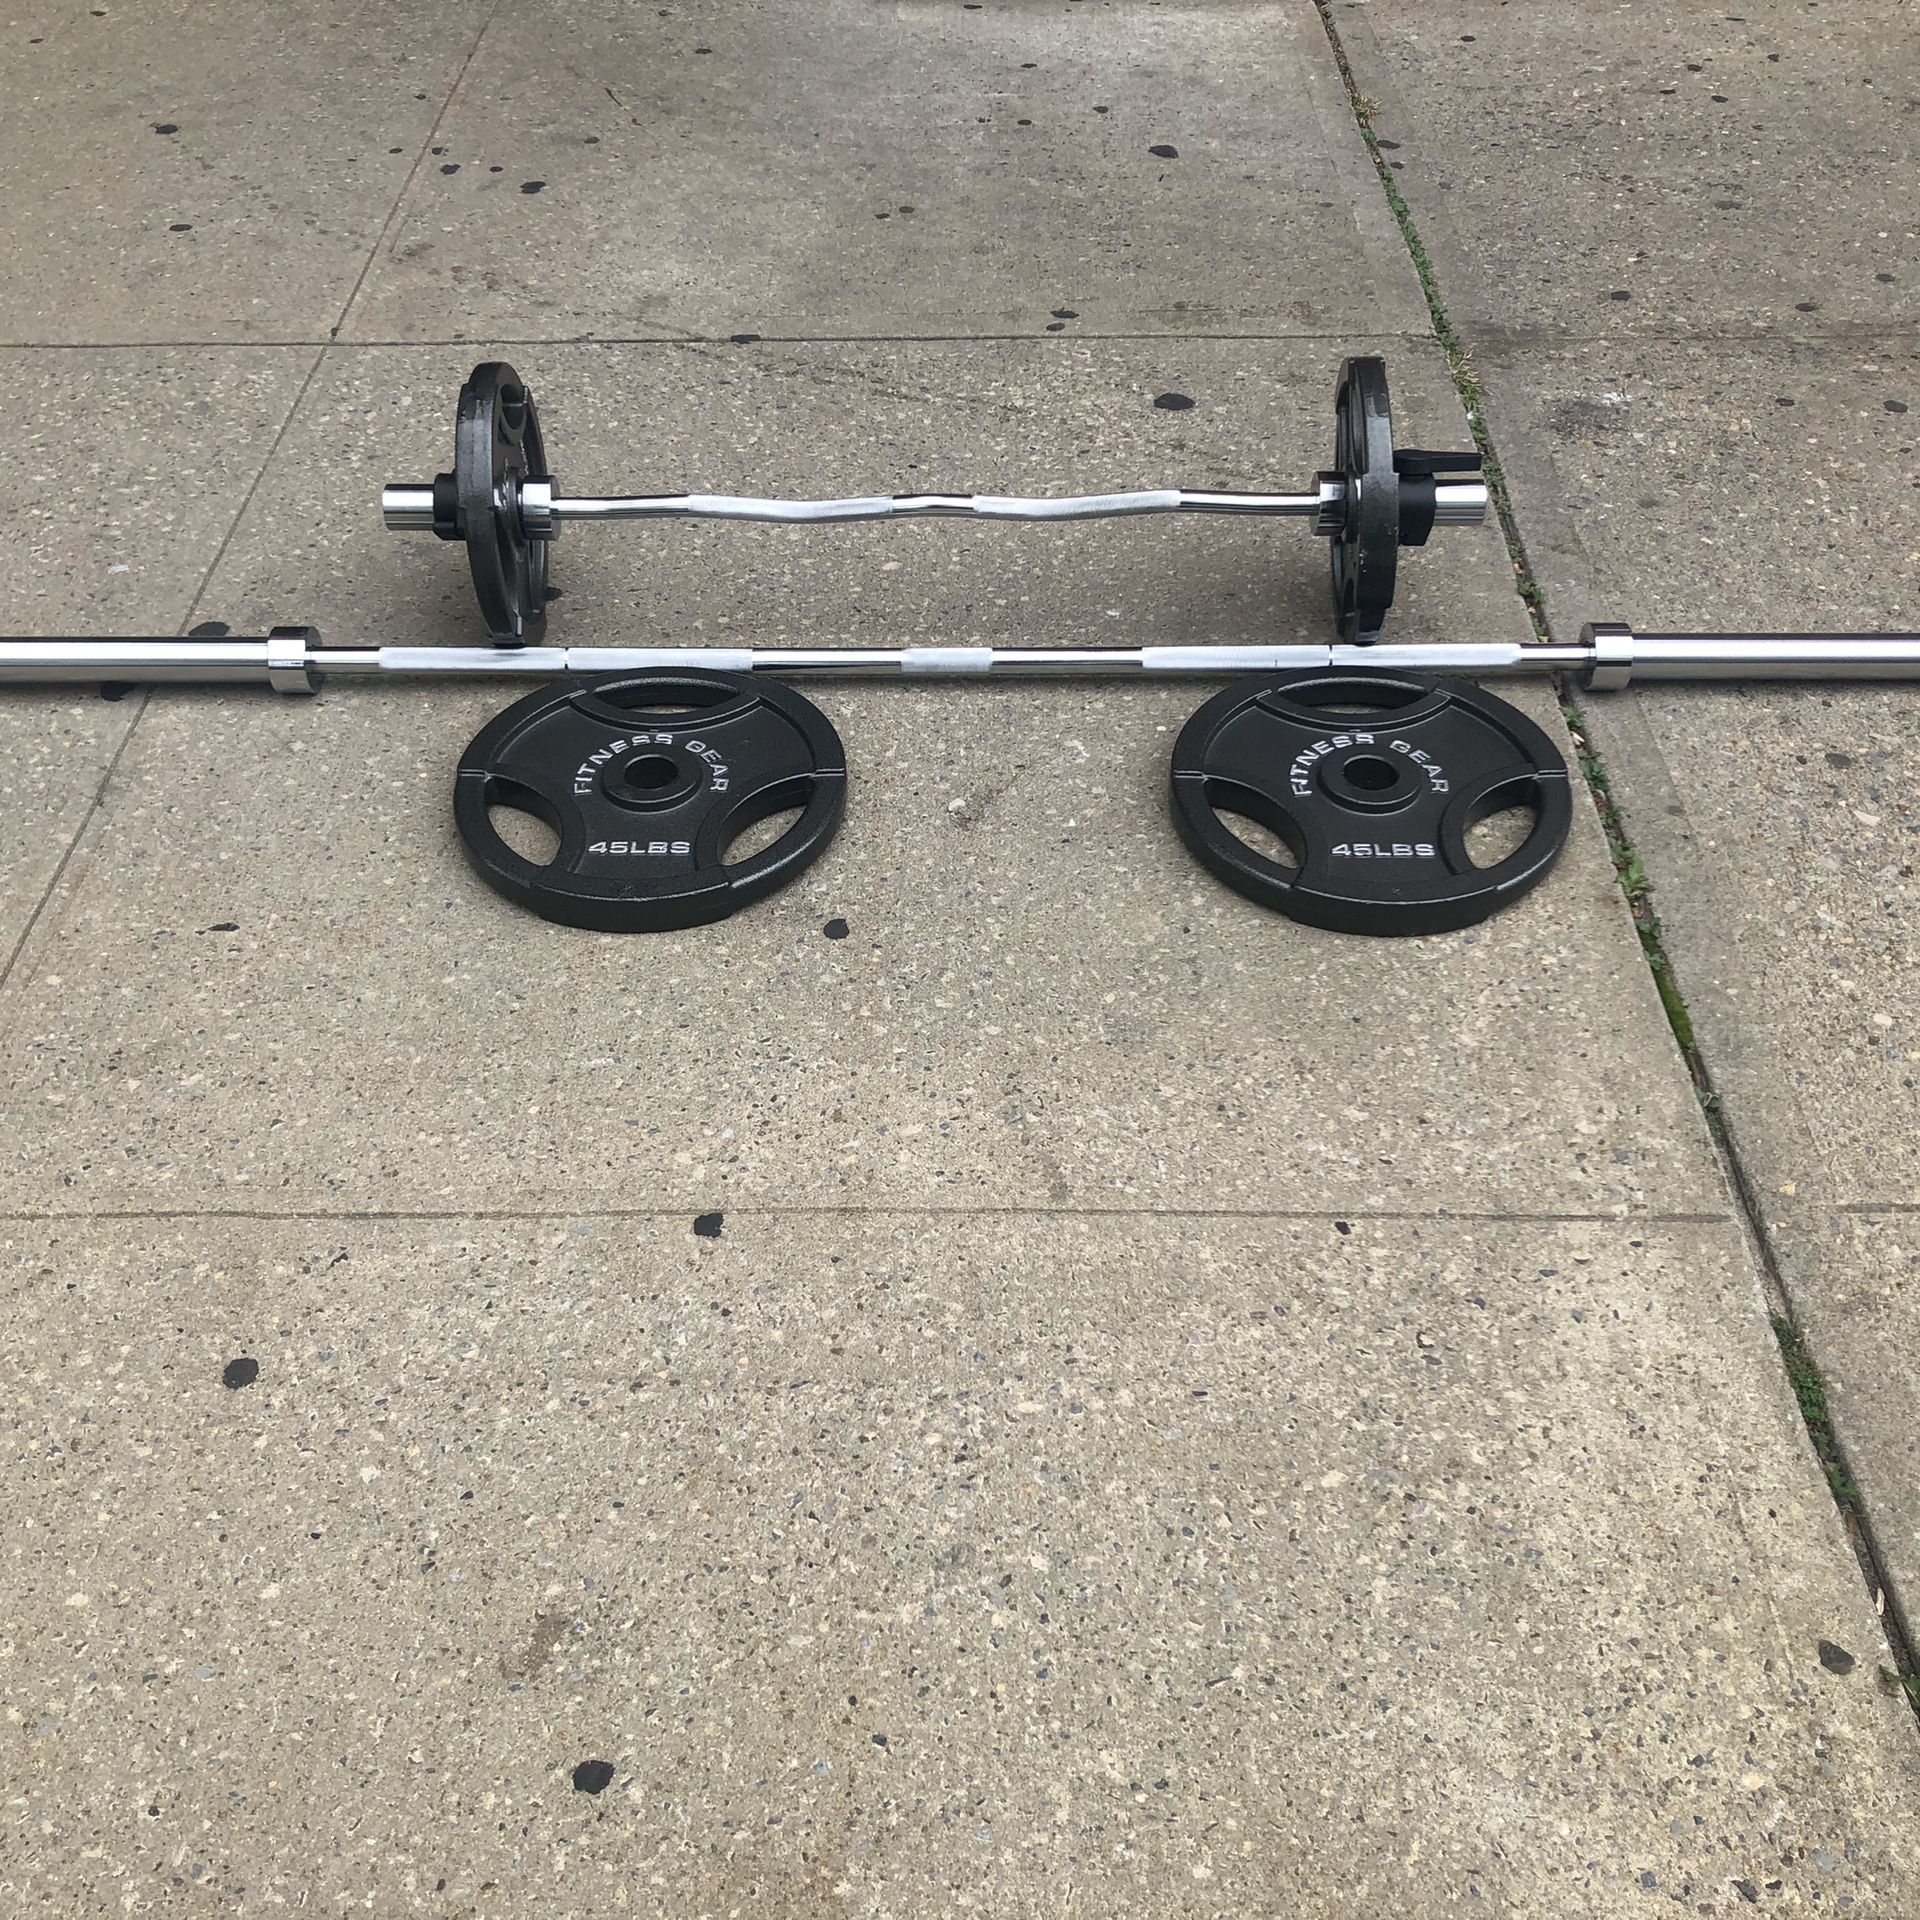 7 foot Olympic bar : Curl bar / 2:45 Olympic plates /2:25 Olympic plates on the curl bar